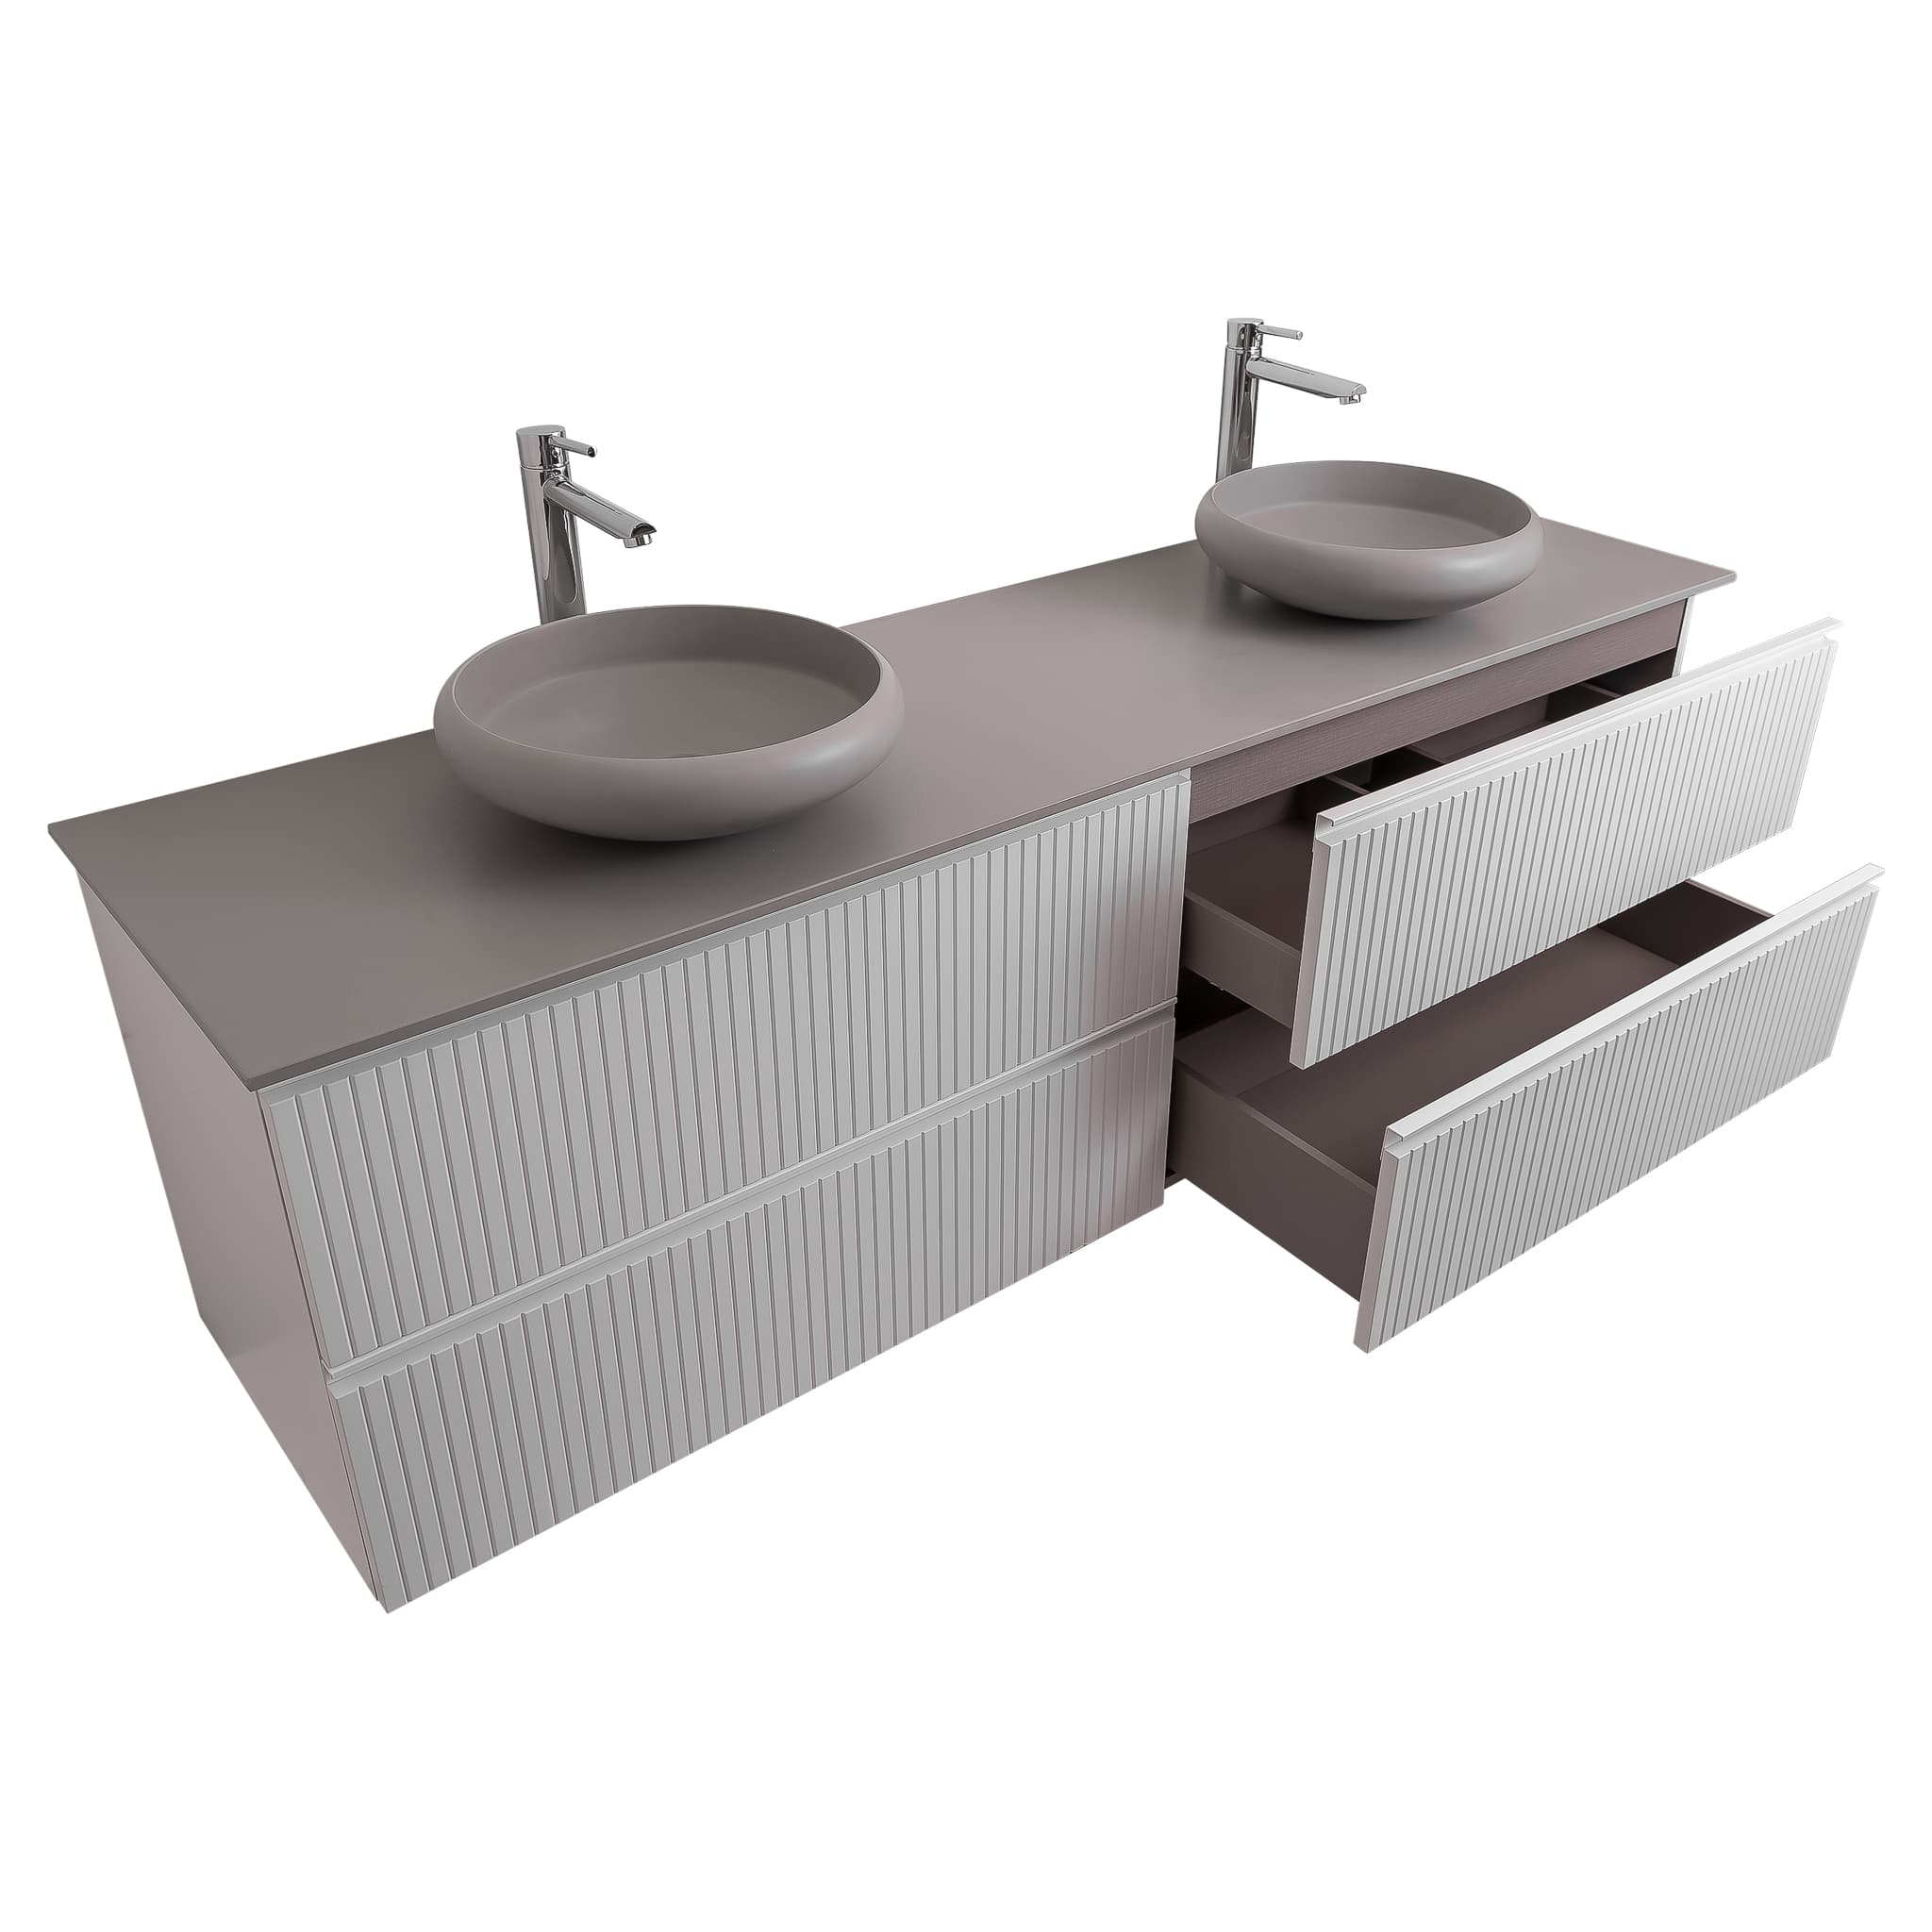 Ares 63 Matte White Cabinet, Solid Surface Flat Grey Counter And Two Round Solid Surface Grey Basin 1153, Wall Mounted Modern Vanity Set